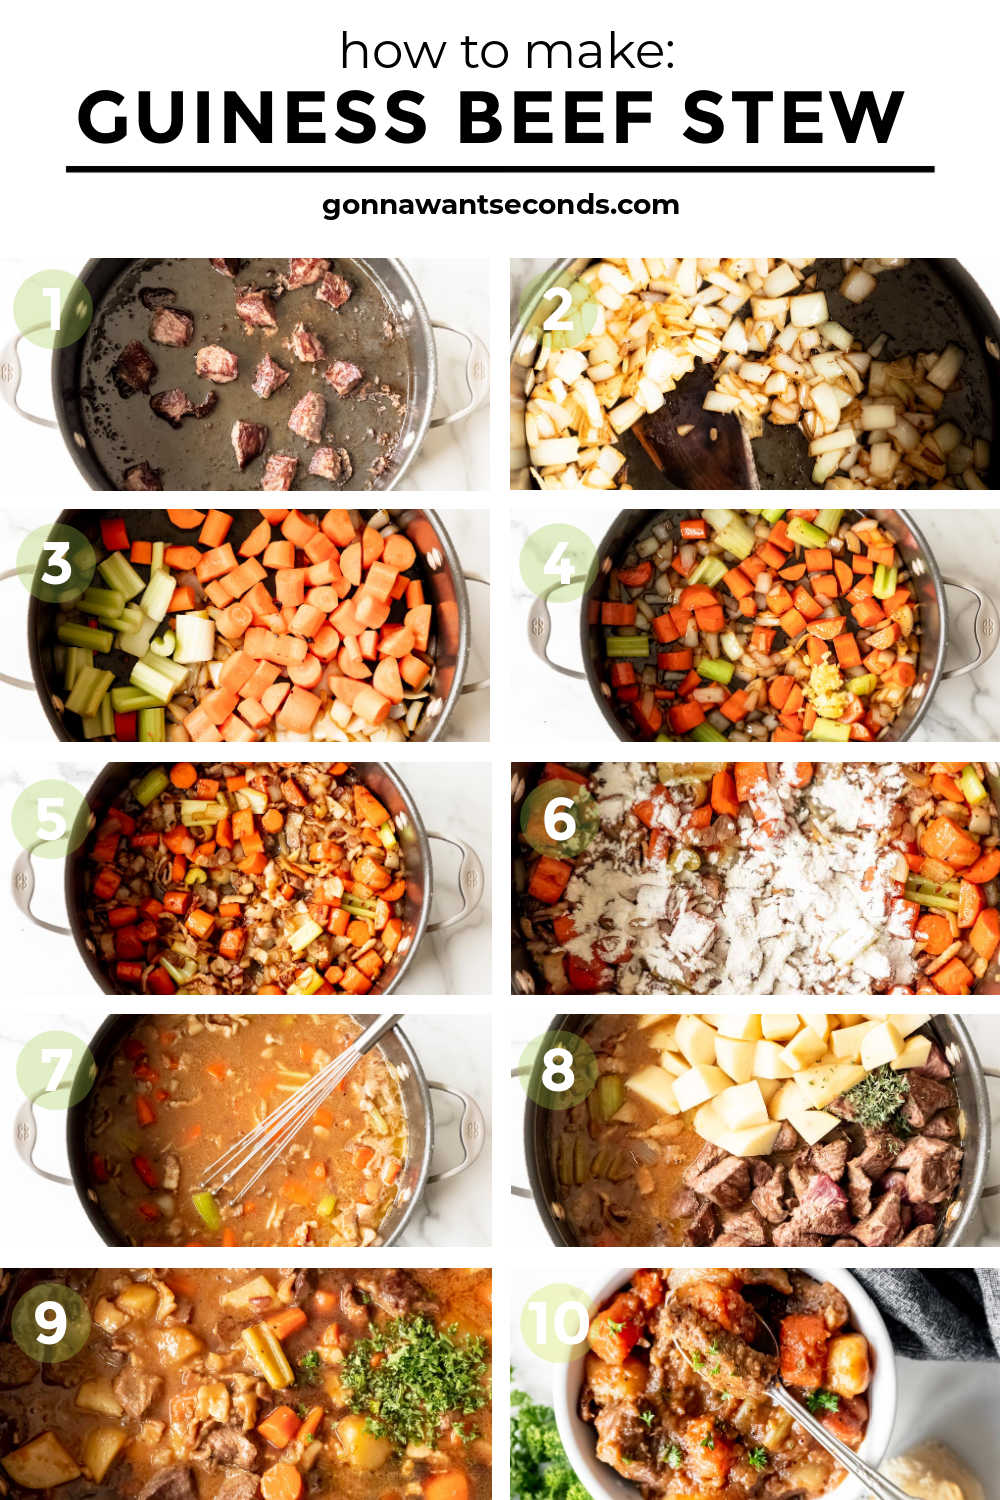 step by step how to make guinness beef stew